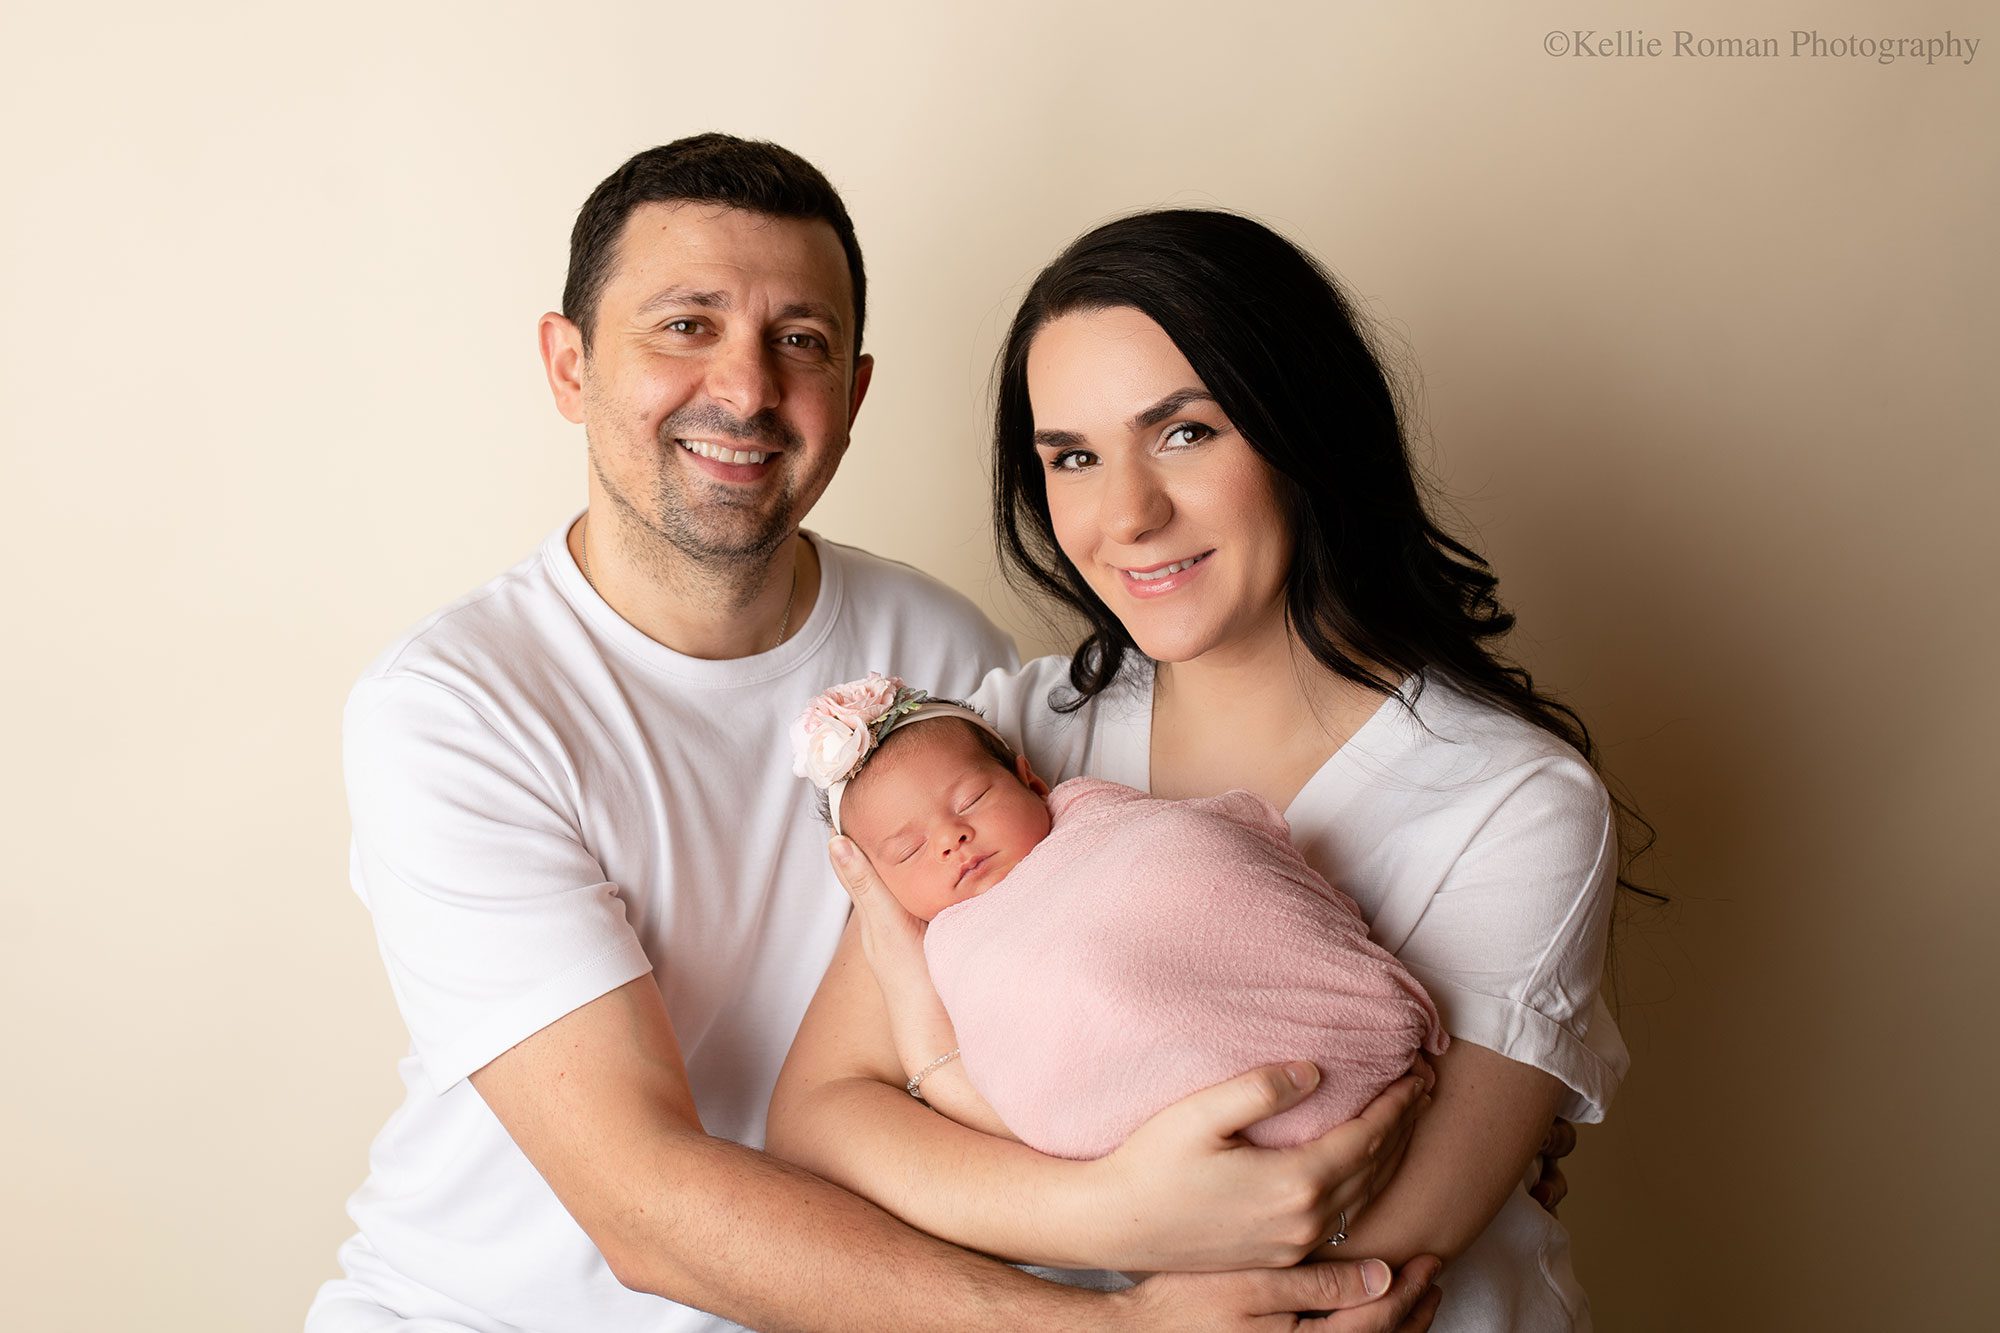 stunning newborn session. 
family of three in milwaukee photo studio. new parents are smiling at the camera. both parents are wearing white shirts. mother is holding newborn girl who has on a light pink swaddle around her and a light pink flower headband.
